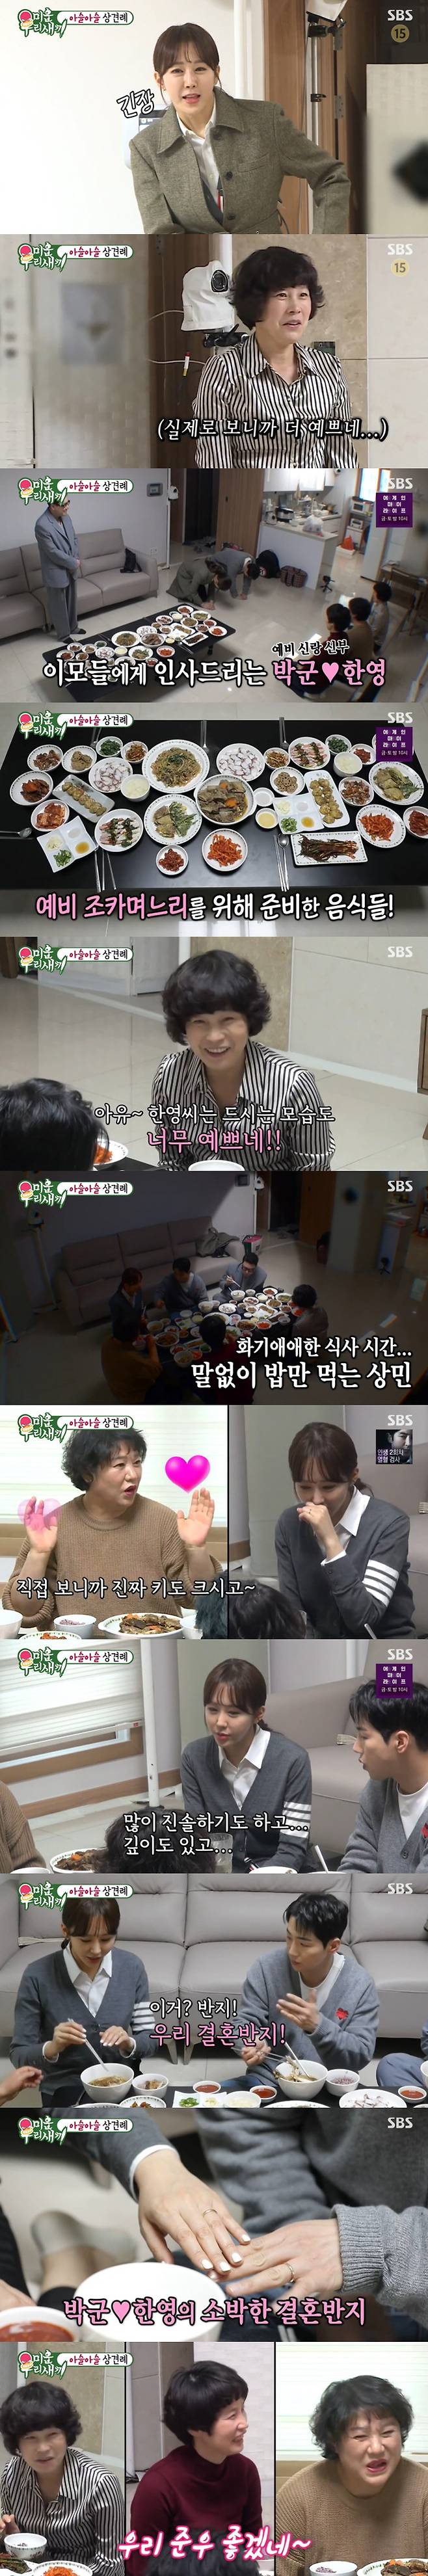 My Little Old Boy Han Young greeted Park Guns mother as a preliminary daughter-in-law in search of a nursery.On SBS My Little Old Boy broadcasted on the 10th, Preliminary Couple Park GunHan Young couple and Lee Sang-mins very special outing were revealed.Park Gun, Han Young couple and Lee Sang-min, who are about to marriage, found a nursery where Park Guns mother is.Park Gun, who visited Sangmin and his mother a year ago, is now in the studio with Han Young, a strong companion.Han Young said, It is the first time I have seen my mother directly. Park Gun said, When Sangmin came with my brother, my mother would have been very strong.But today, I think my mother will be more confident. I think she will like it too much. Arriving at the cemetery, Han Young first raised his glass to his mother as a prospective daughter-in-law and theft.Bengus smiled with a smile as he watched Han Young, who had carefully packed the food that Park Guns mother liked during her life, including various fruit eels.In particular, Han Young said, I want to live so much that I want to live, but I am sorry for it. Park Gun mother presented her favorite red shoes.Park Gun repeatedly regretted, saying, How much would you like if your mother was there? Lee Sang-min also praised Han Young, saying, The atmosphere is so different from last year.Park Gun said: Once youre pretty and youre kind of hearted.I am like my mother, I sing well and I am good at food. He officially introduced Han Young in front of my mother. I am comfortable with the fact that I have a family.It is so good that I have a real side, he said.Han Young said, When Park Gun eats delicious and wears pretty clothes, he says, I will like it if my mother sees it. I will go to a lot of good places together in the future and I will live well so that I do not worry about my mother. Also, Park Gun said of the new family caused by marriage, My mother-in-law said, I think I have another son, its strong.I think I can think that my father and mother have one more person. Han Young said, My mother said that I wanted to be the mother of Park Gun. Finally, Lee Sang-min said, I will help you with the Park Gun marriage ceremony.I want you to watch them beautifully, he said. Come with your child next year. The meeting between the three people and the aunts of Park Gun was revealed and focused attention. The pure appearance of the aunts who were nervous in front of Han Young, who first met, caused laughter.Han Young greeted Park Guns aunts formally, bowing; their aunts smiled, Thank you, please be good to our Park Gun.I have set up all my favorite foods, said the aunts who made a grand prize for Han Young. How beautiful is it to eat? Since when is it so beautiful?He is really tall and dolllike, he said, and he was pretty.Asked by aunts, Where is Park Guns good? Han Young said, It was very different from other people. It was genuine and deep.The aunts praised Park Gun for growing up really well in a difficult environment, and Han Young also said, There is not a good person like this, really the right person.The marriage rings of the two were also revealed. Park Gun said, I wanted to give you a better ring.I want to buy you something better later, and my aunts praised Han Young for saying, My heart is as beautiful as my face. On this day, Park Gun constantly took Han Young and did not hide the love figure in front of aunts.